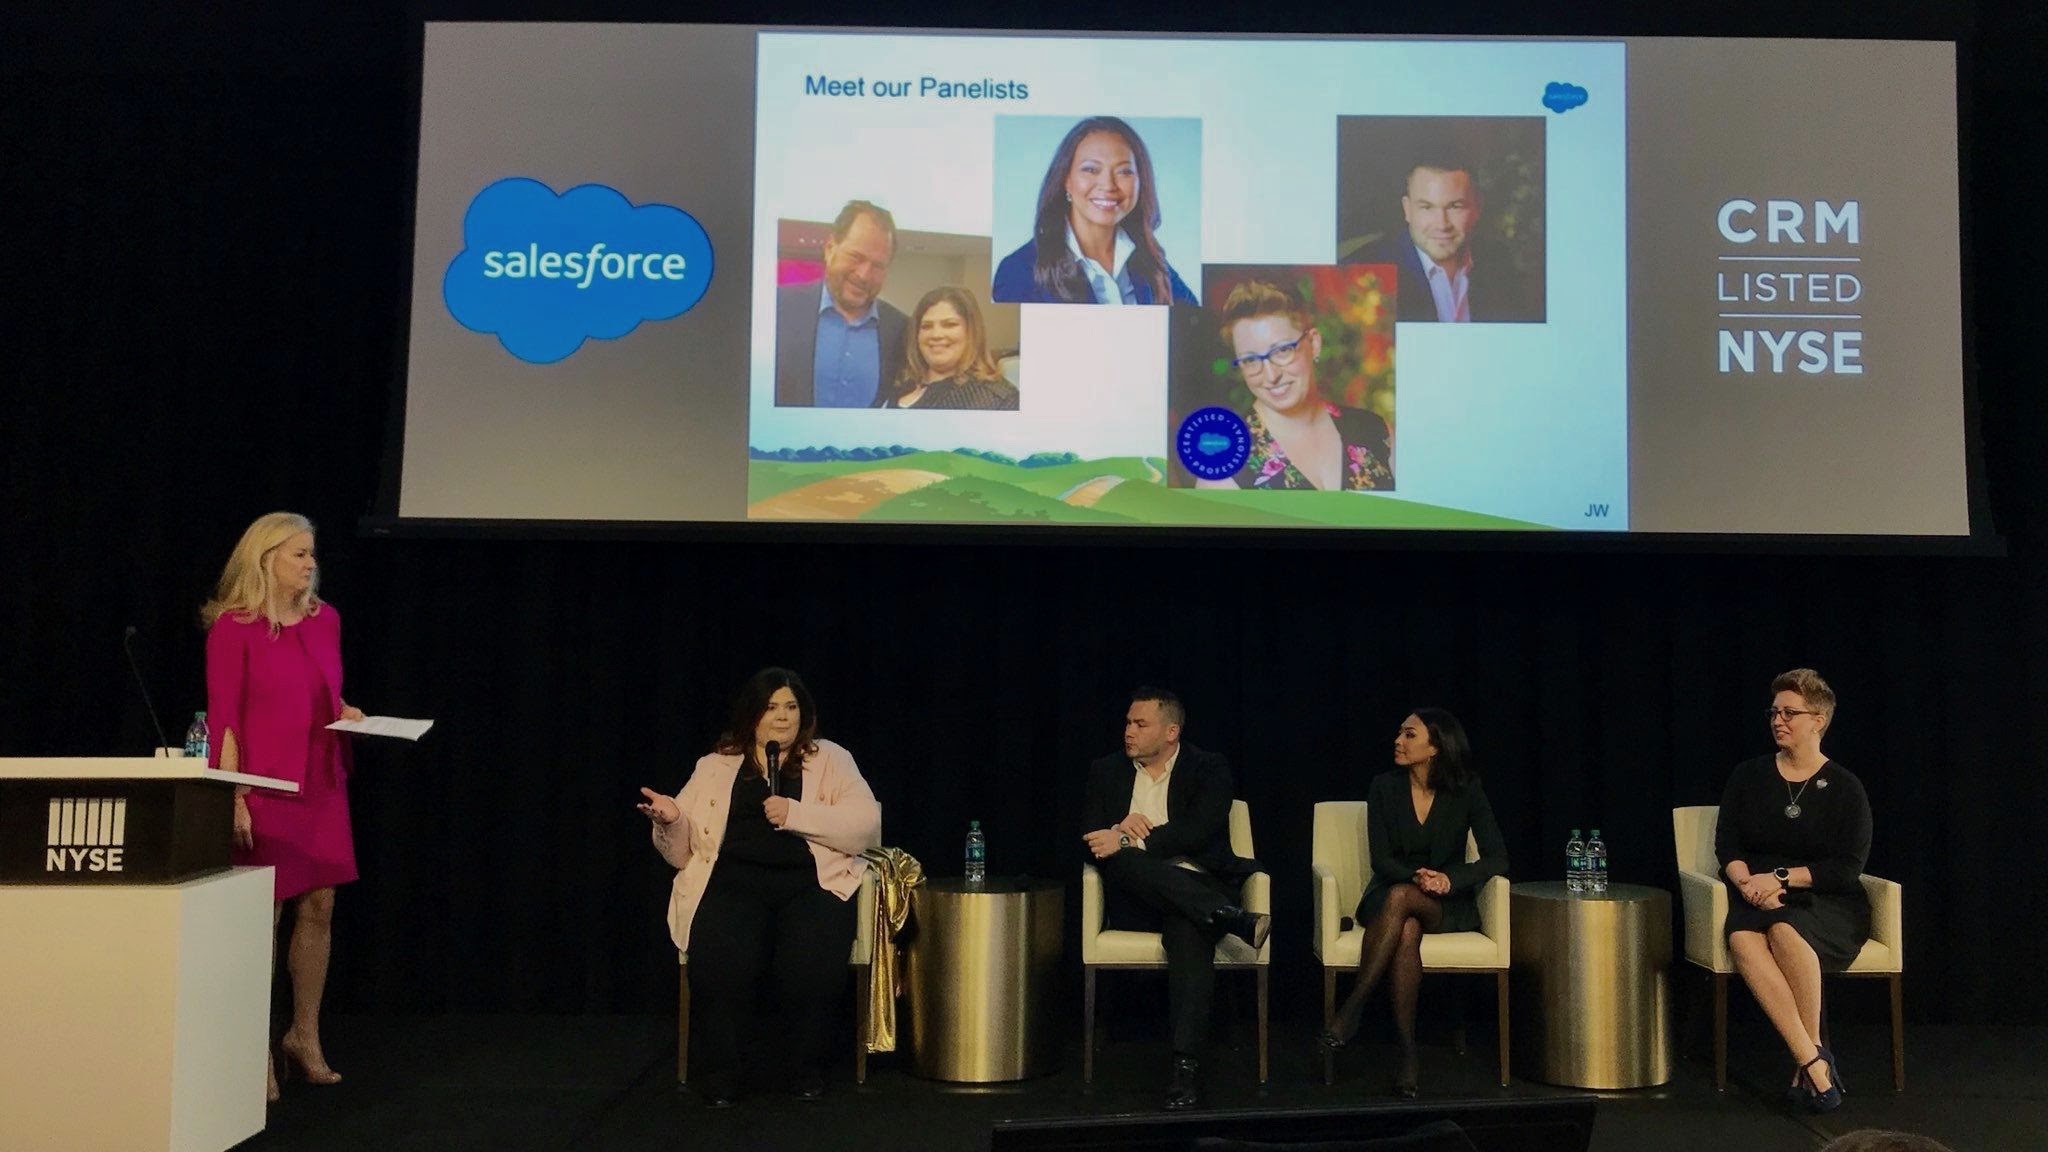 Forcery founder Tigh Loughhead presenting on a New York Stock Exchange panel to Salesforce Leadership with Cheryl Feldman, Carrie Mantione and Sandi Zellner